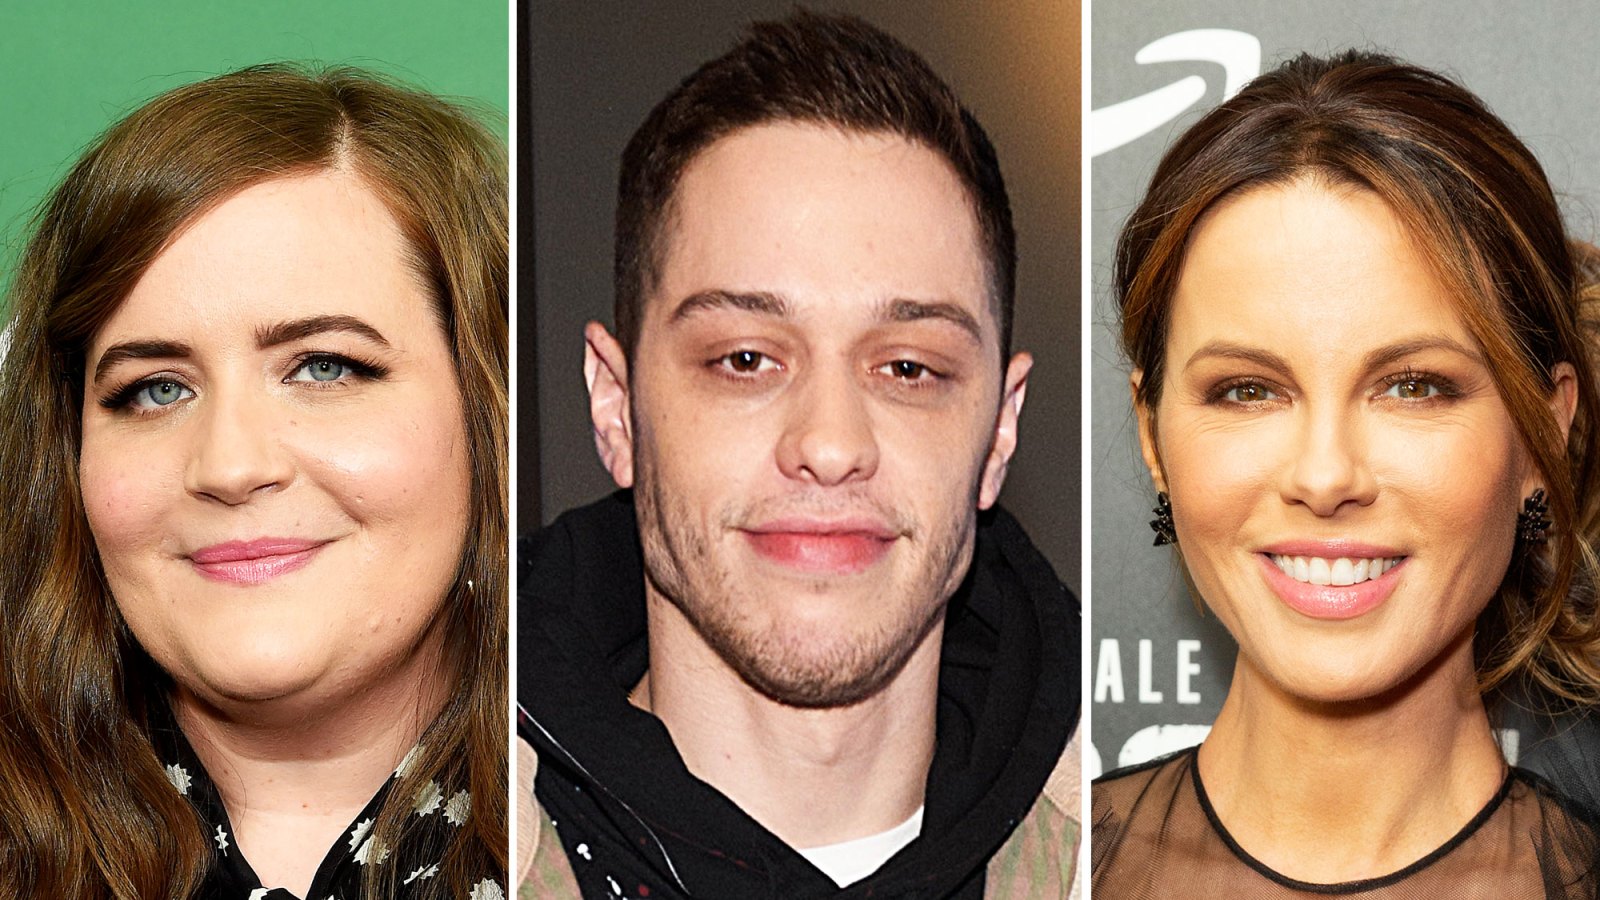 Aidy Bryant Wishes 'the Best' for 'SNL' Costar Pete Davidson and His New GF Kate Beckinsale